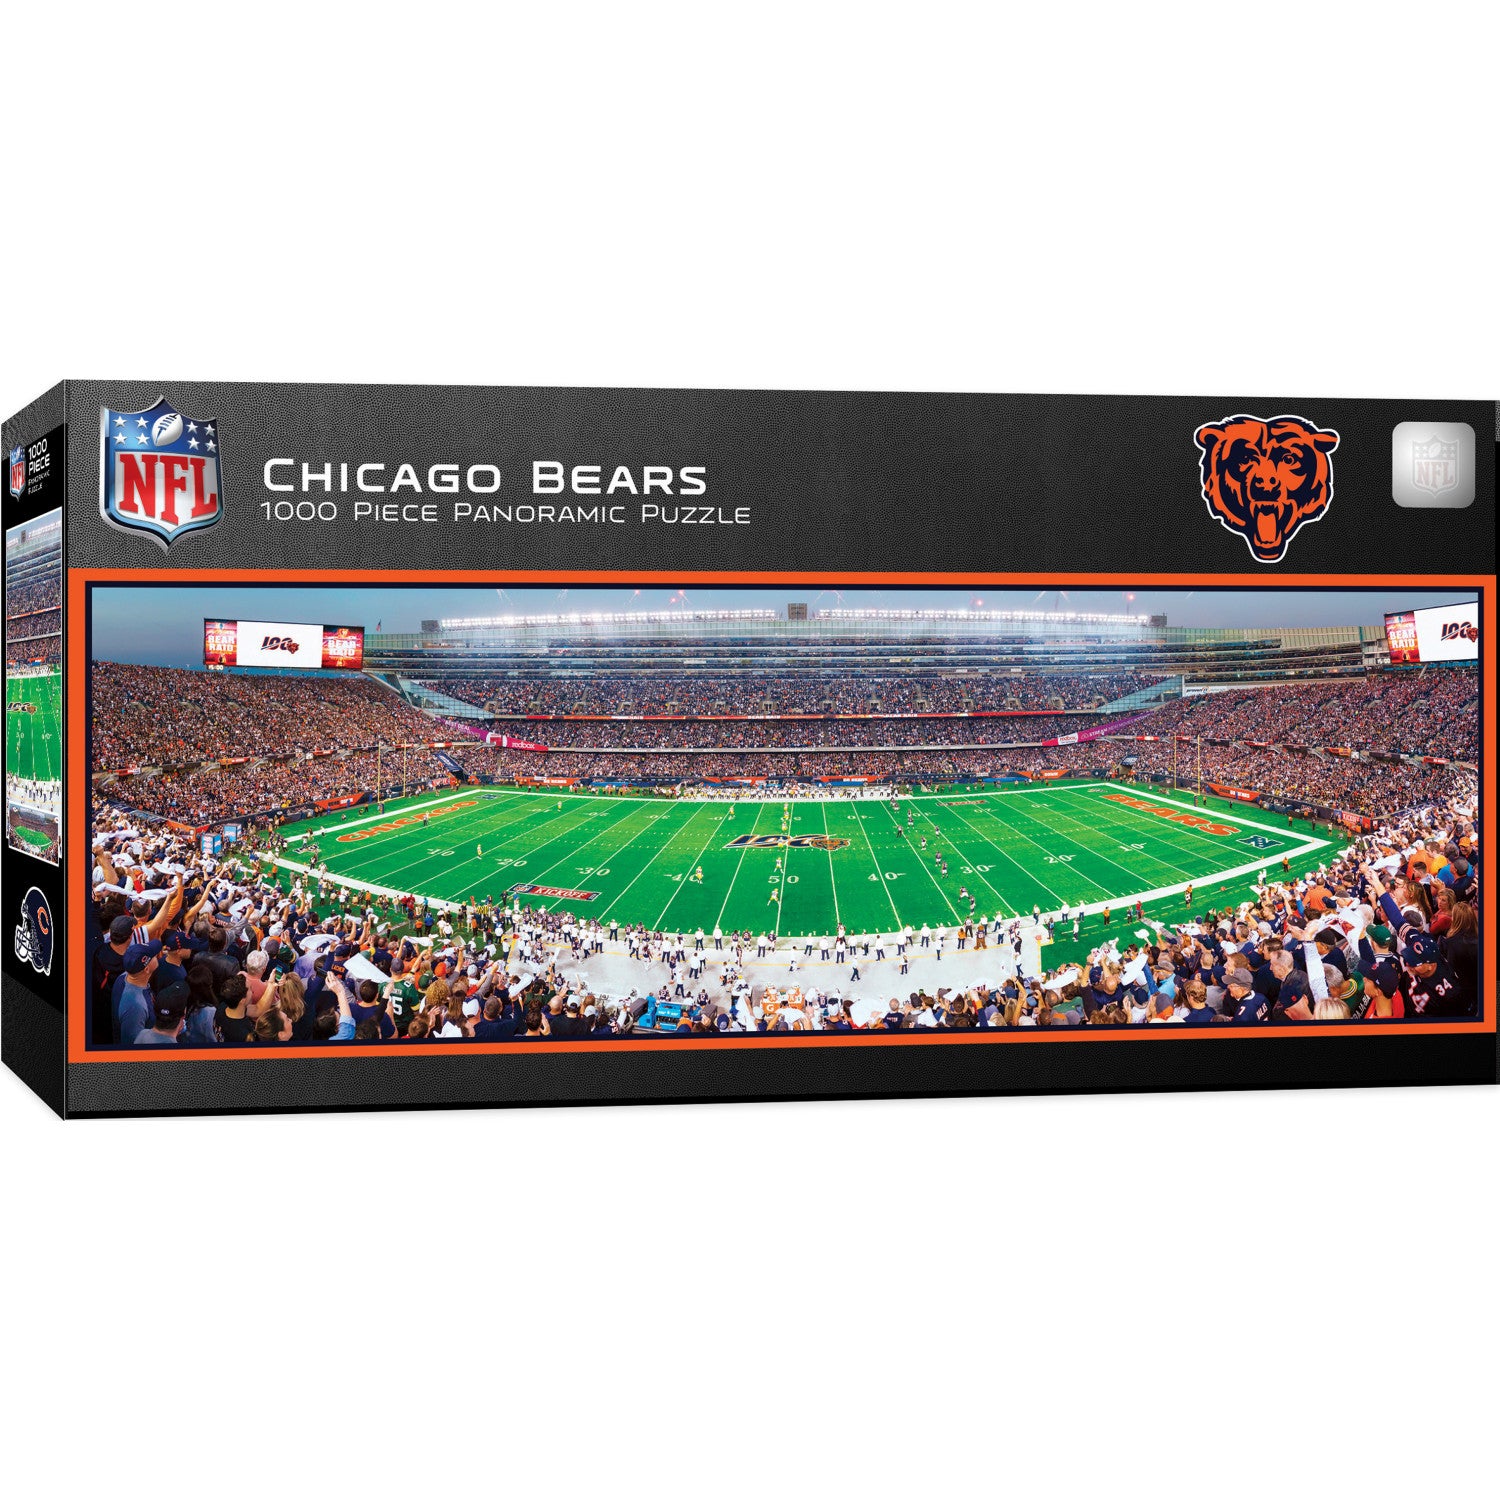 Chicago Bears - 1000 Piece Panoramic Puzzle - Center View